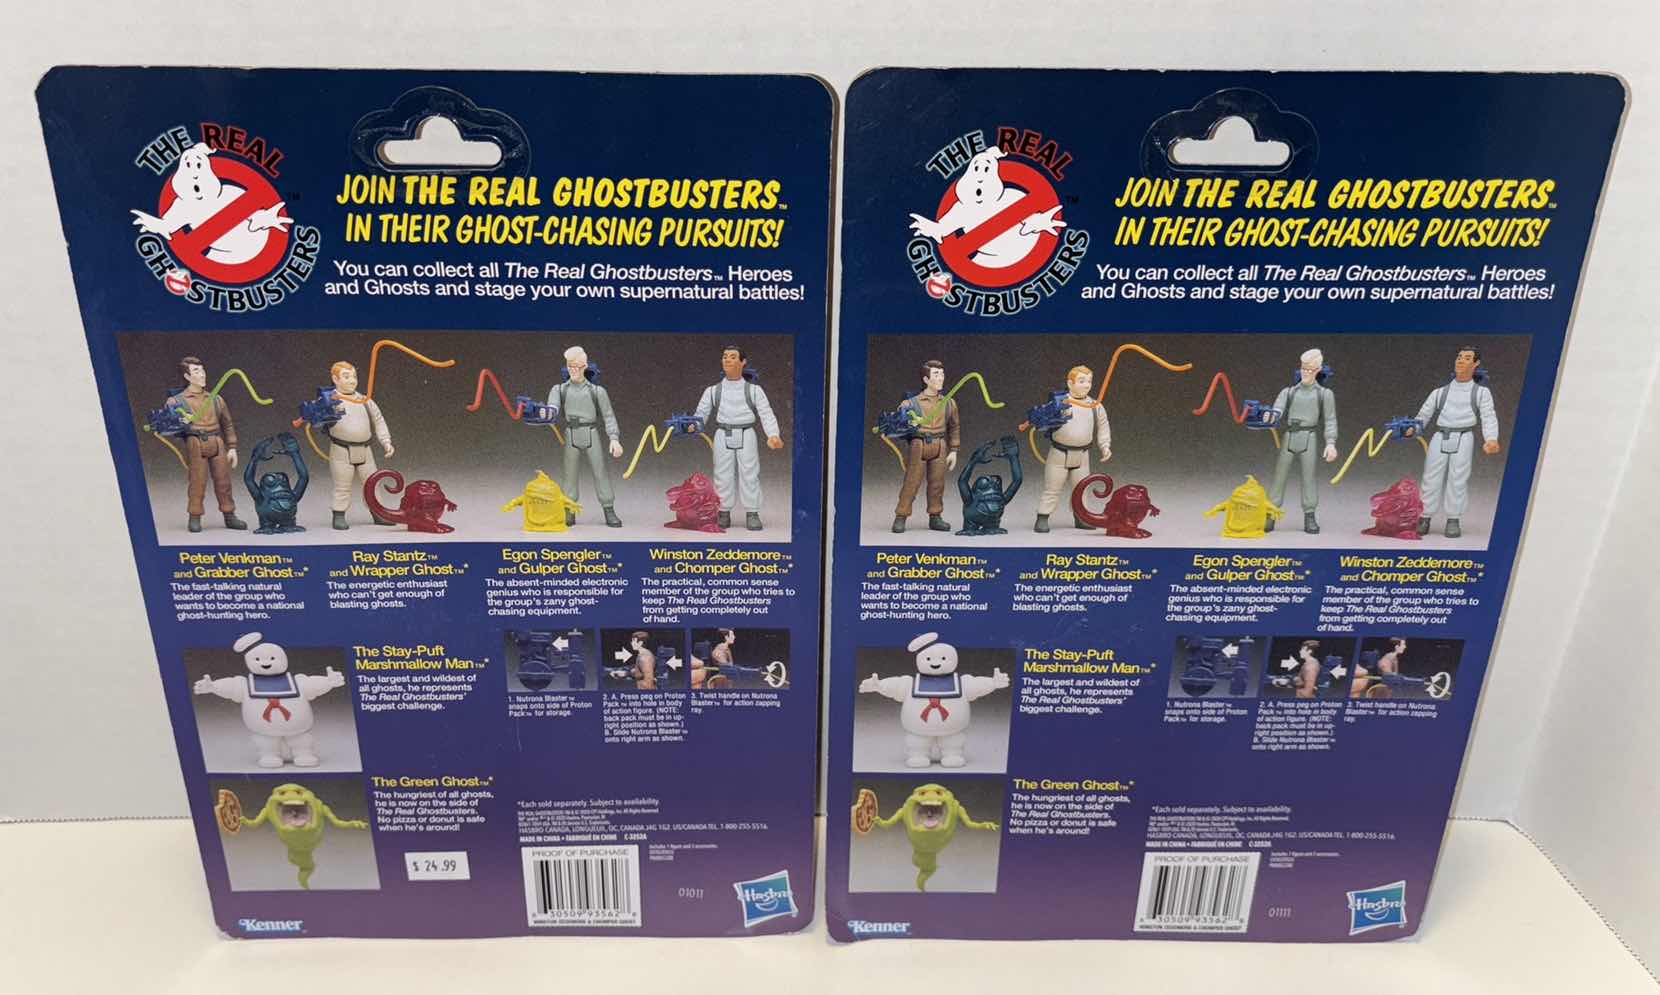 Photo 5 of NEW HASBRO KENNER THE REAL GHOSTBUSTERS ACTION FIGURE & ACCESSORIES 3-PACK, “PETER VENKMAN & GRABBER GHOST”, “WINSTON ZEDDEMORE & CHOMPER GHOST” x 2